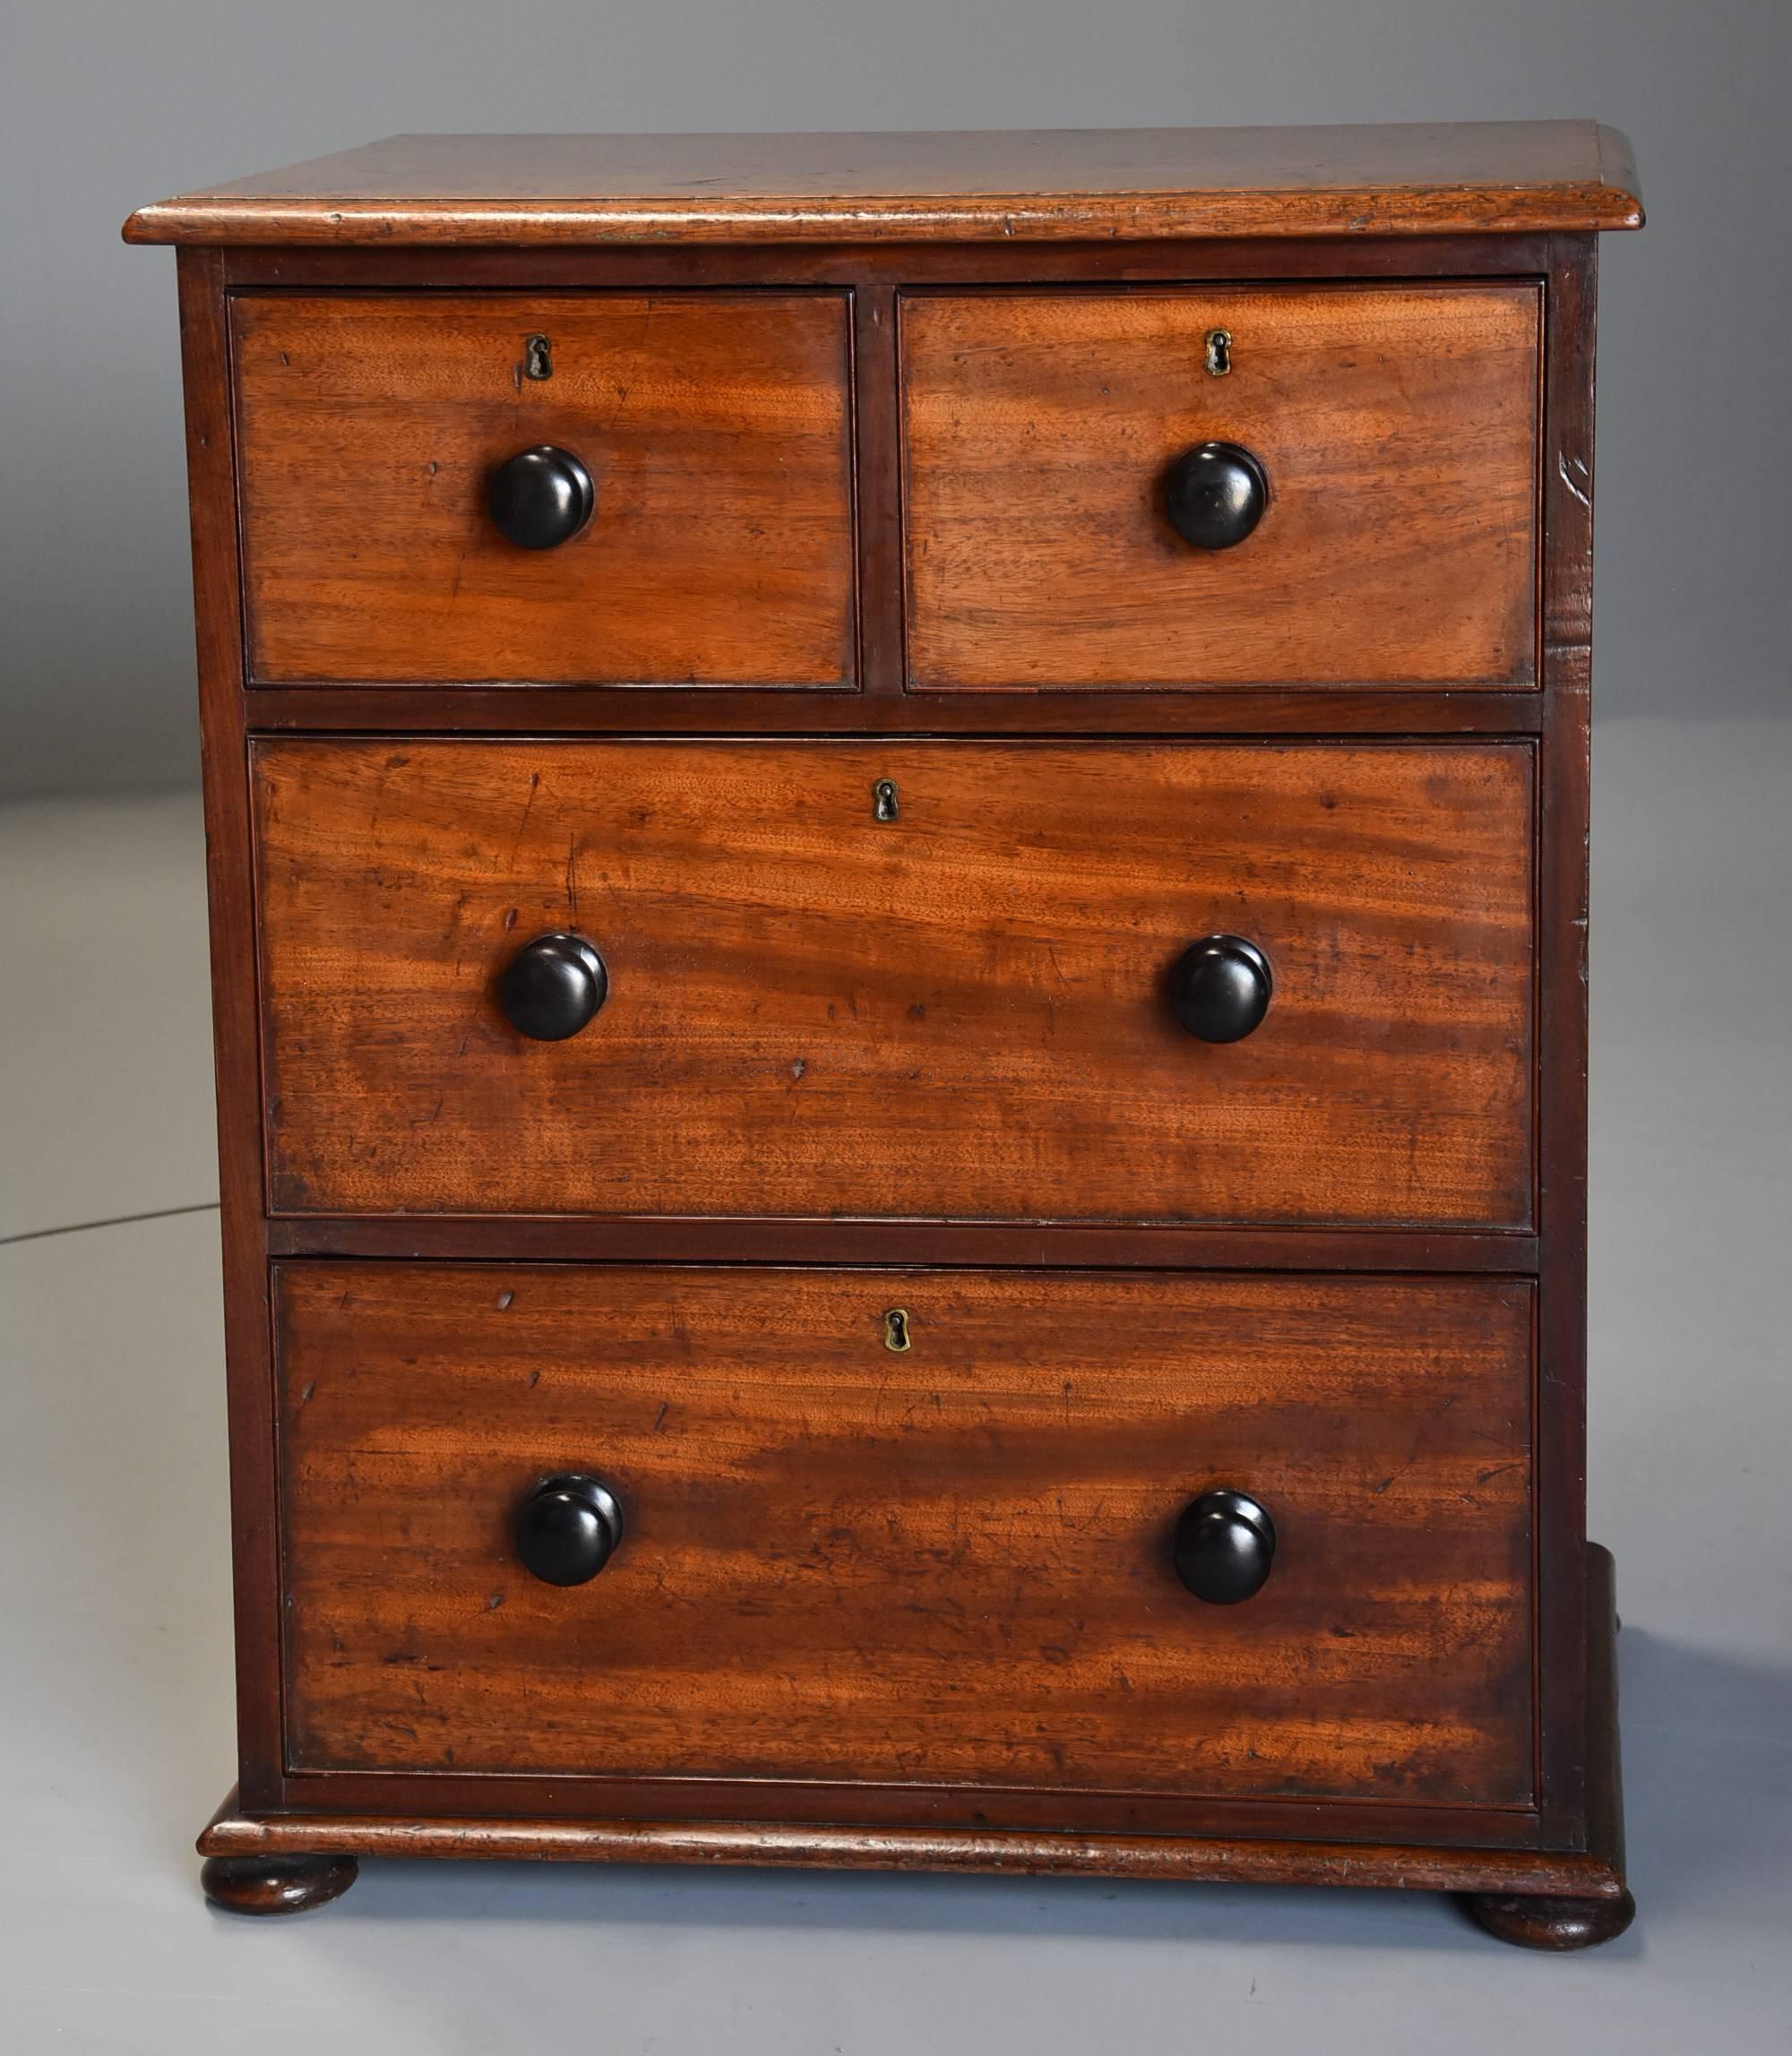 A small mid-19th century mahogany chest of drawers with superb patina.

This chest of drawers consists of a solid mahogany top with moulded edge leading down to two short over two long drawers.

The cockbeaded drawers being oak lined and having